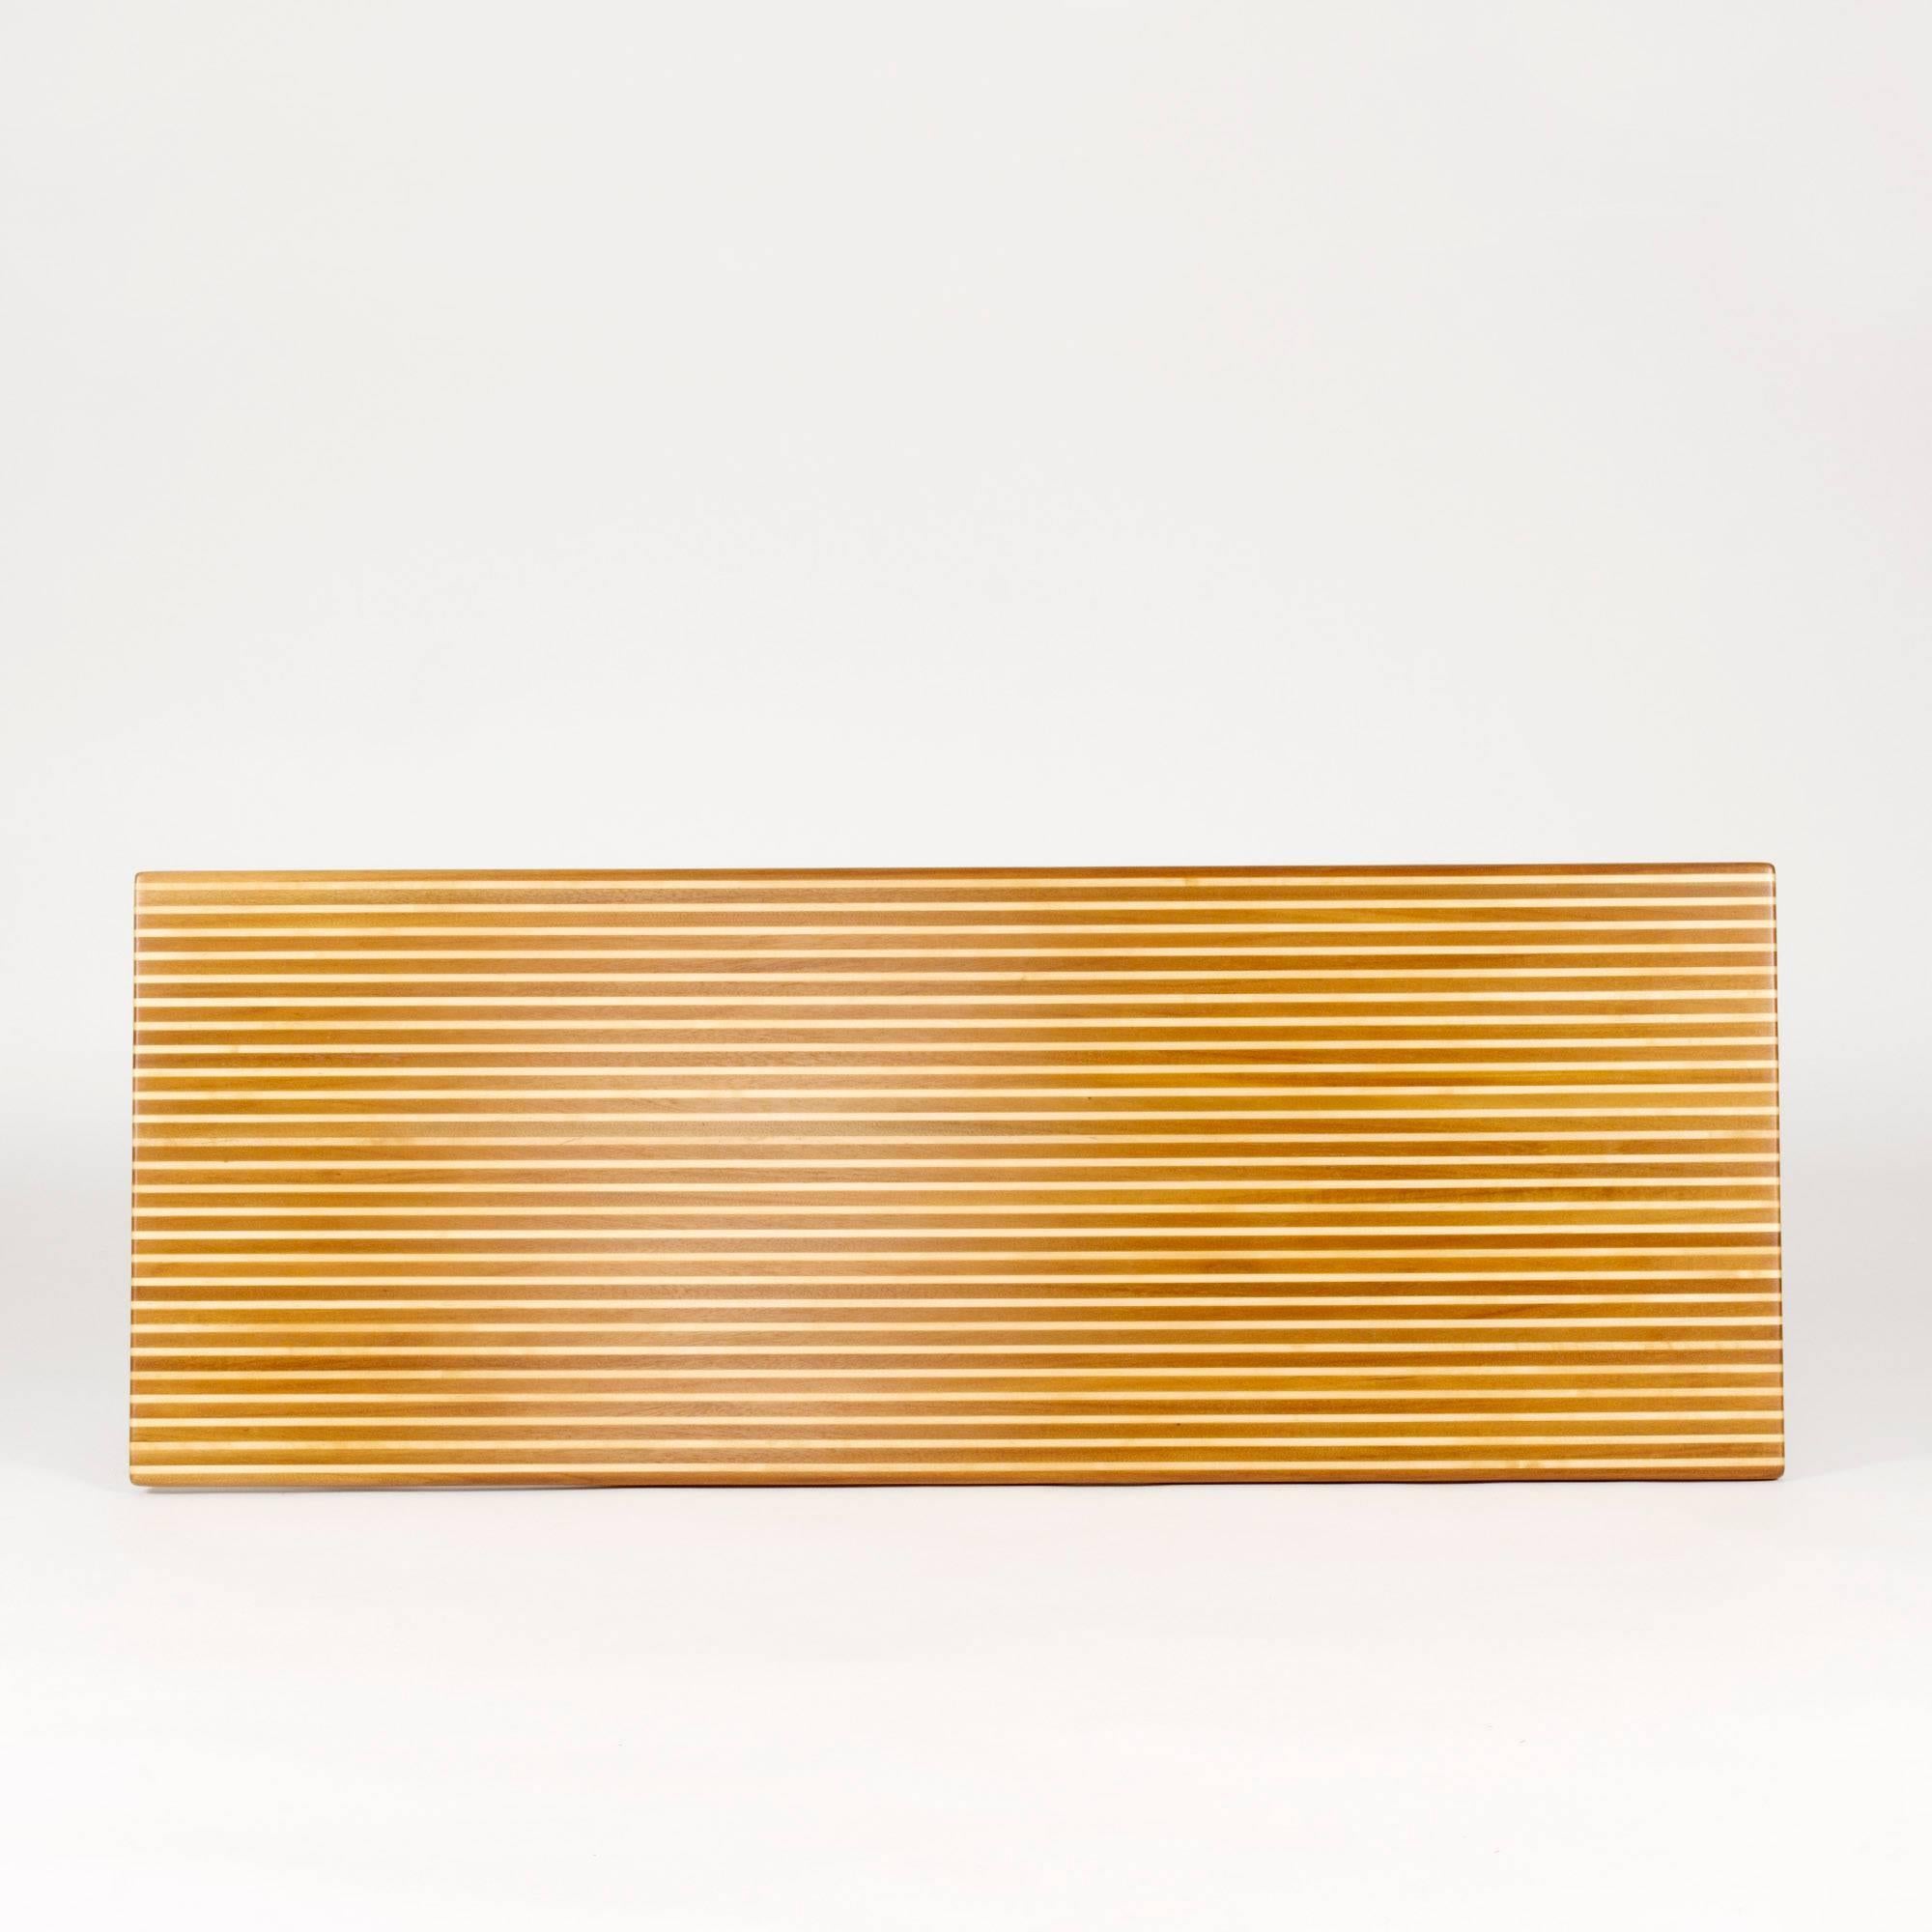 Amazing coffee table by Yngvar Sandström, in a striped pattern created by alternating teak and birch in the solid wood tabletop.